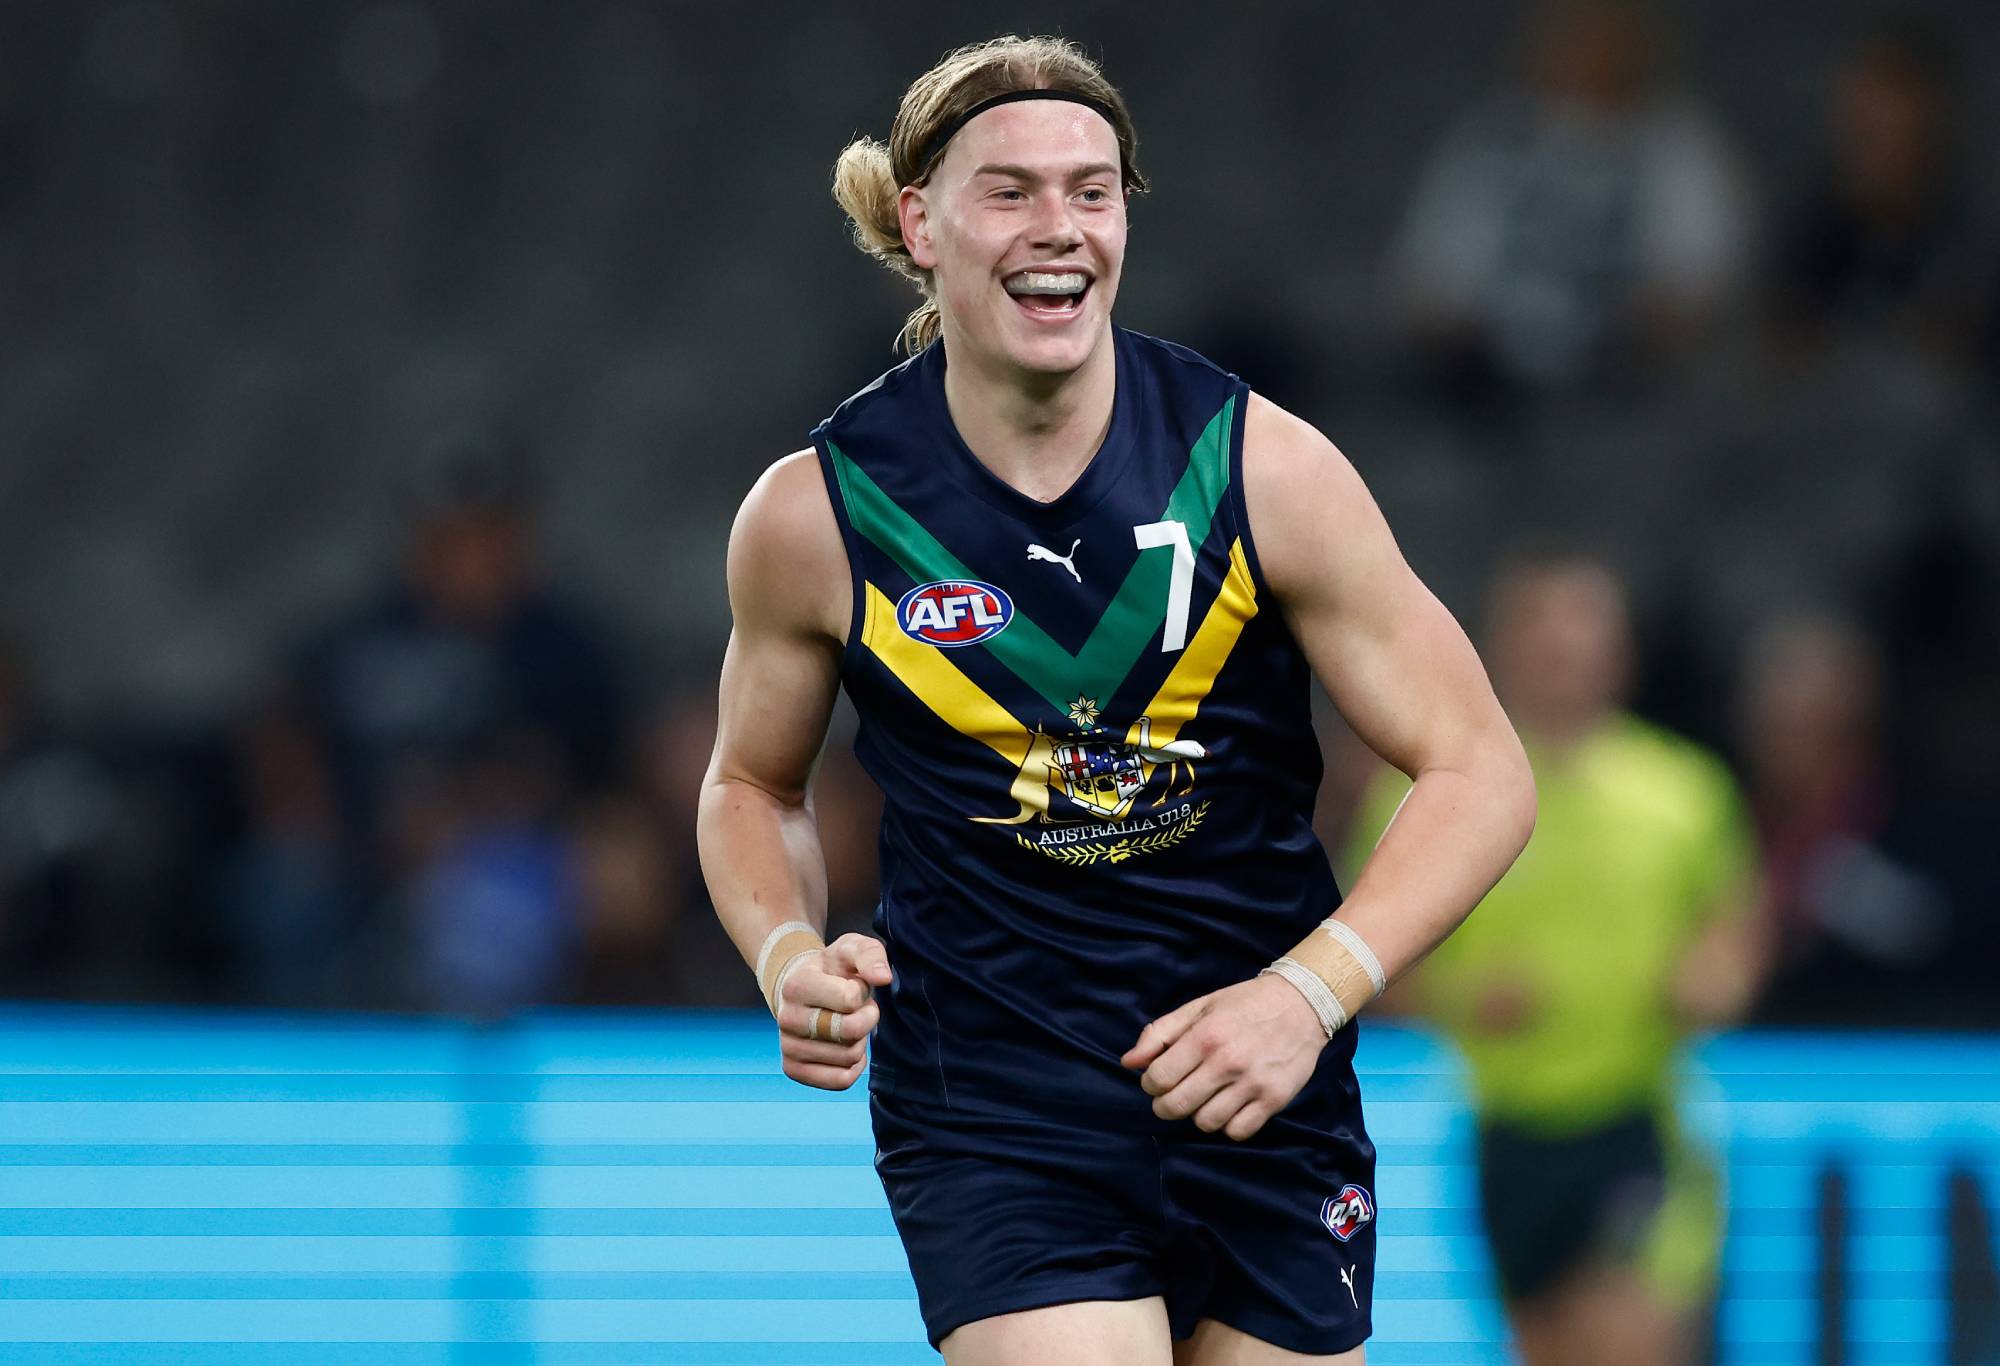 Harley Reid of the AFL Academy in action during the match between the AFL Academy Boys and Carlton VFL at Marvel Stadium on May 13, 2023 in Melbourne, Australia. (Photo by Michael Willson/AFL Photos via Getty Images)